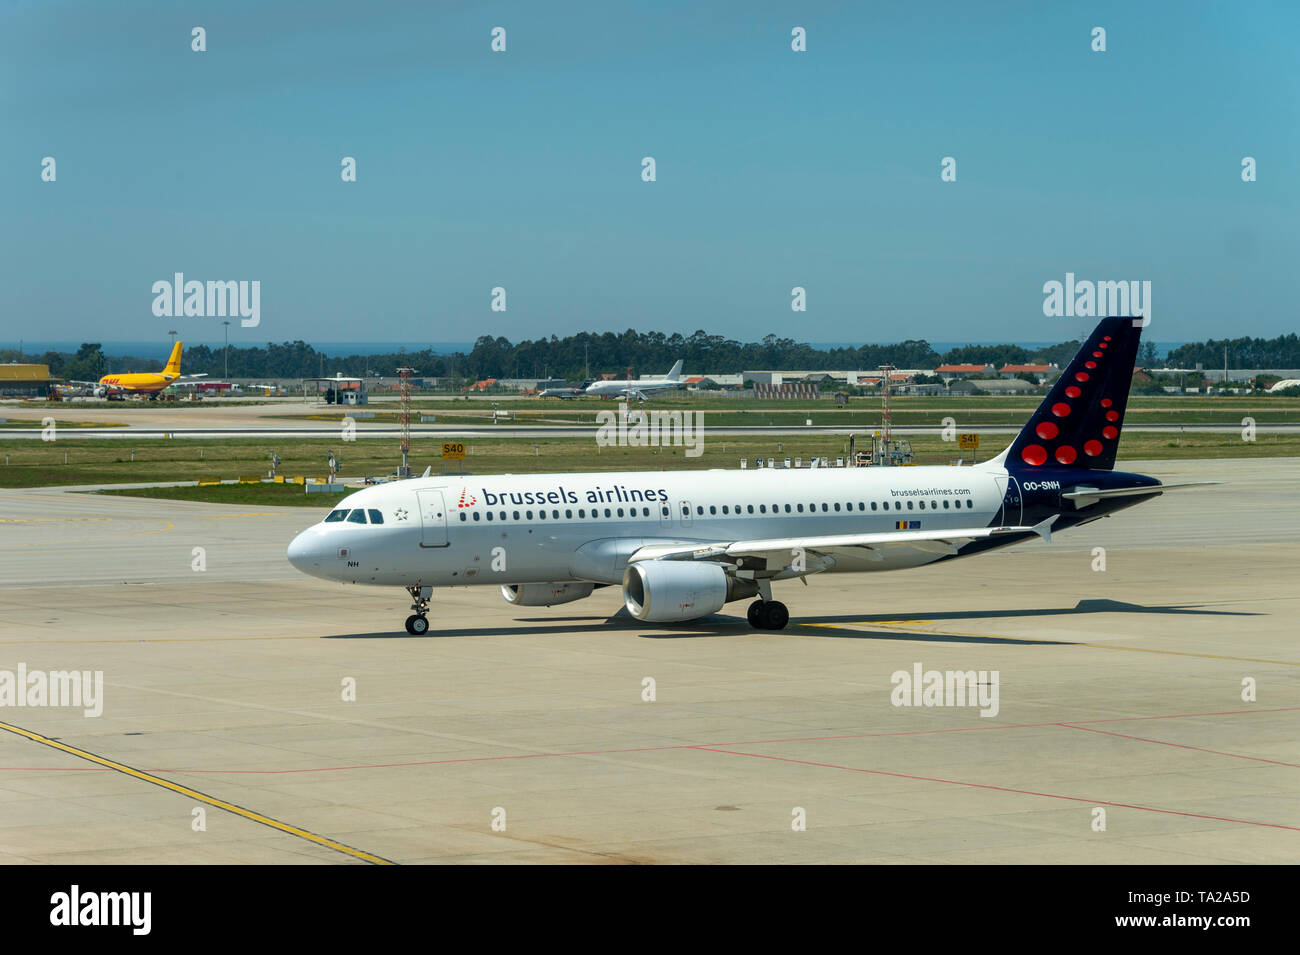 Brussels Airlines Airbus A 320 on the tarmac at Francisco Sá Carneiro Airport, Porto, Portugal. Stock Photo